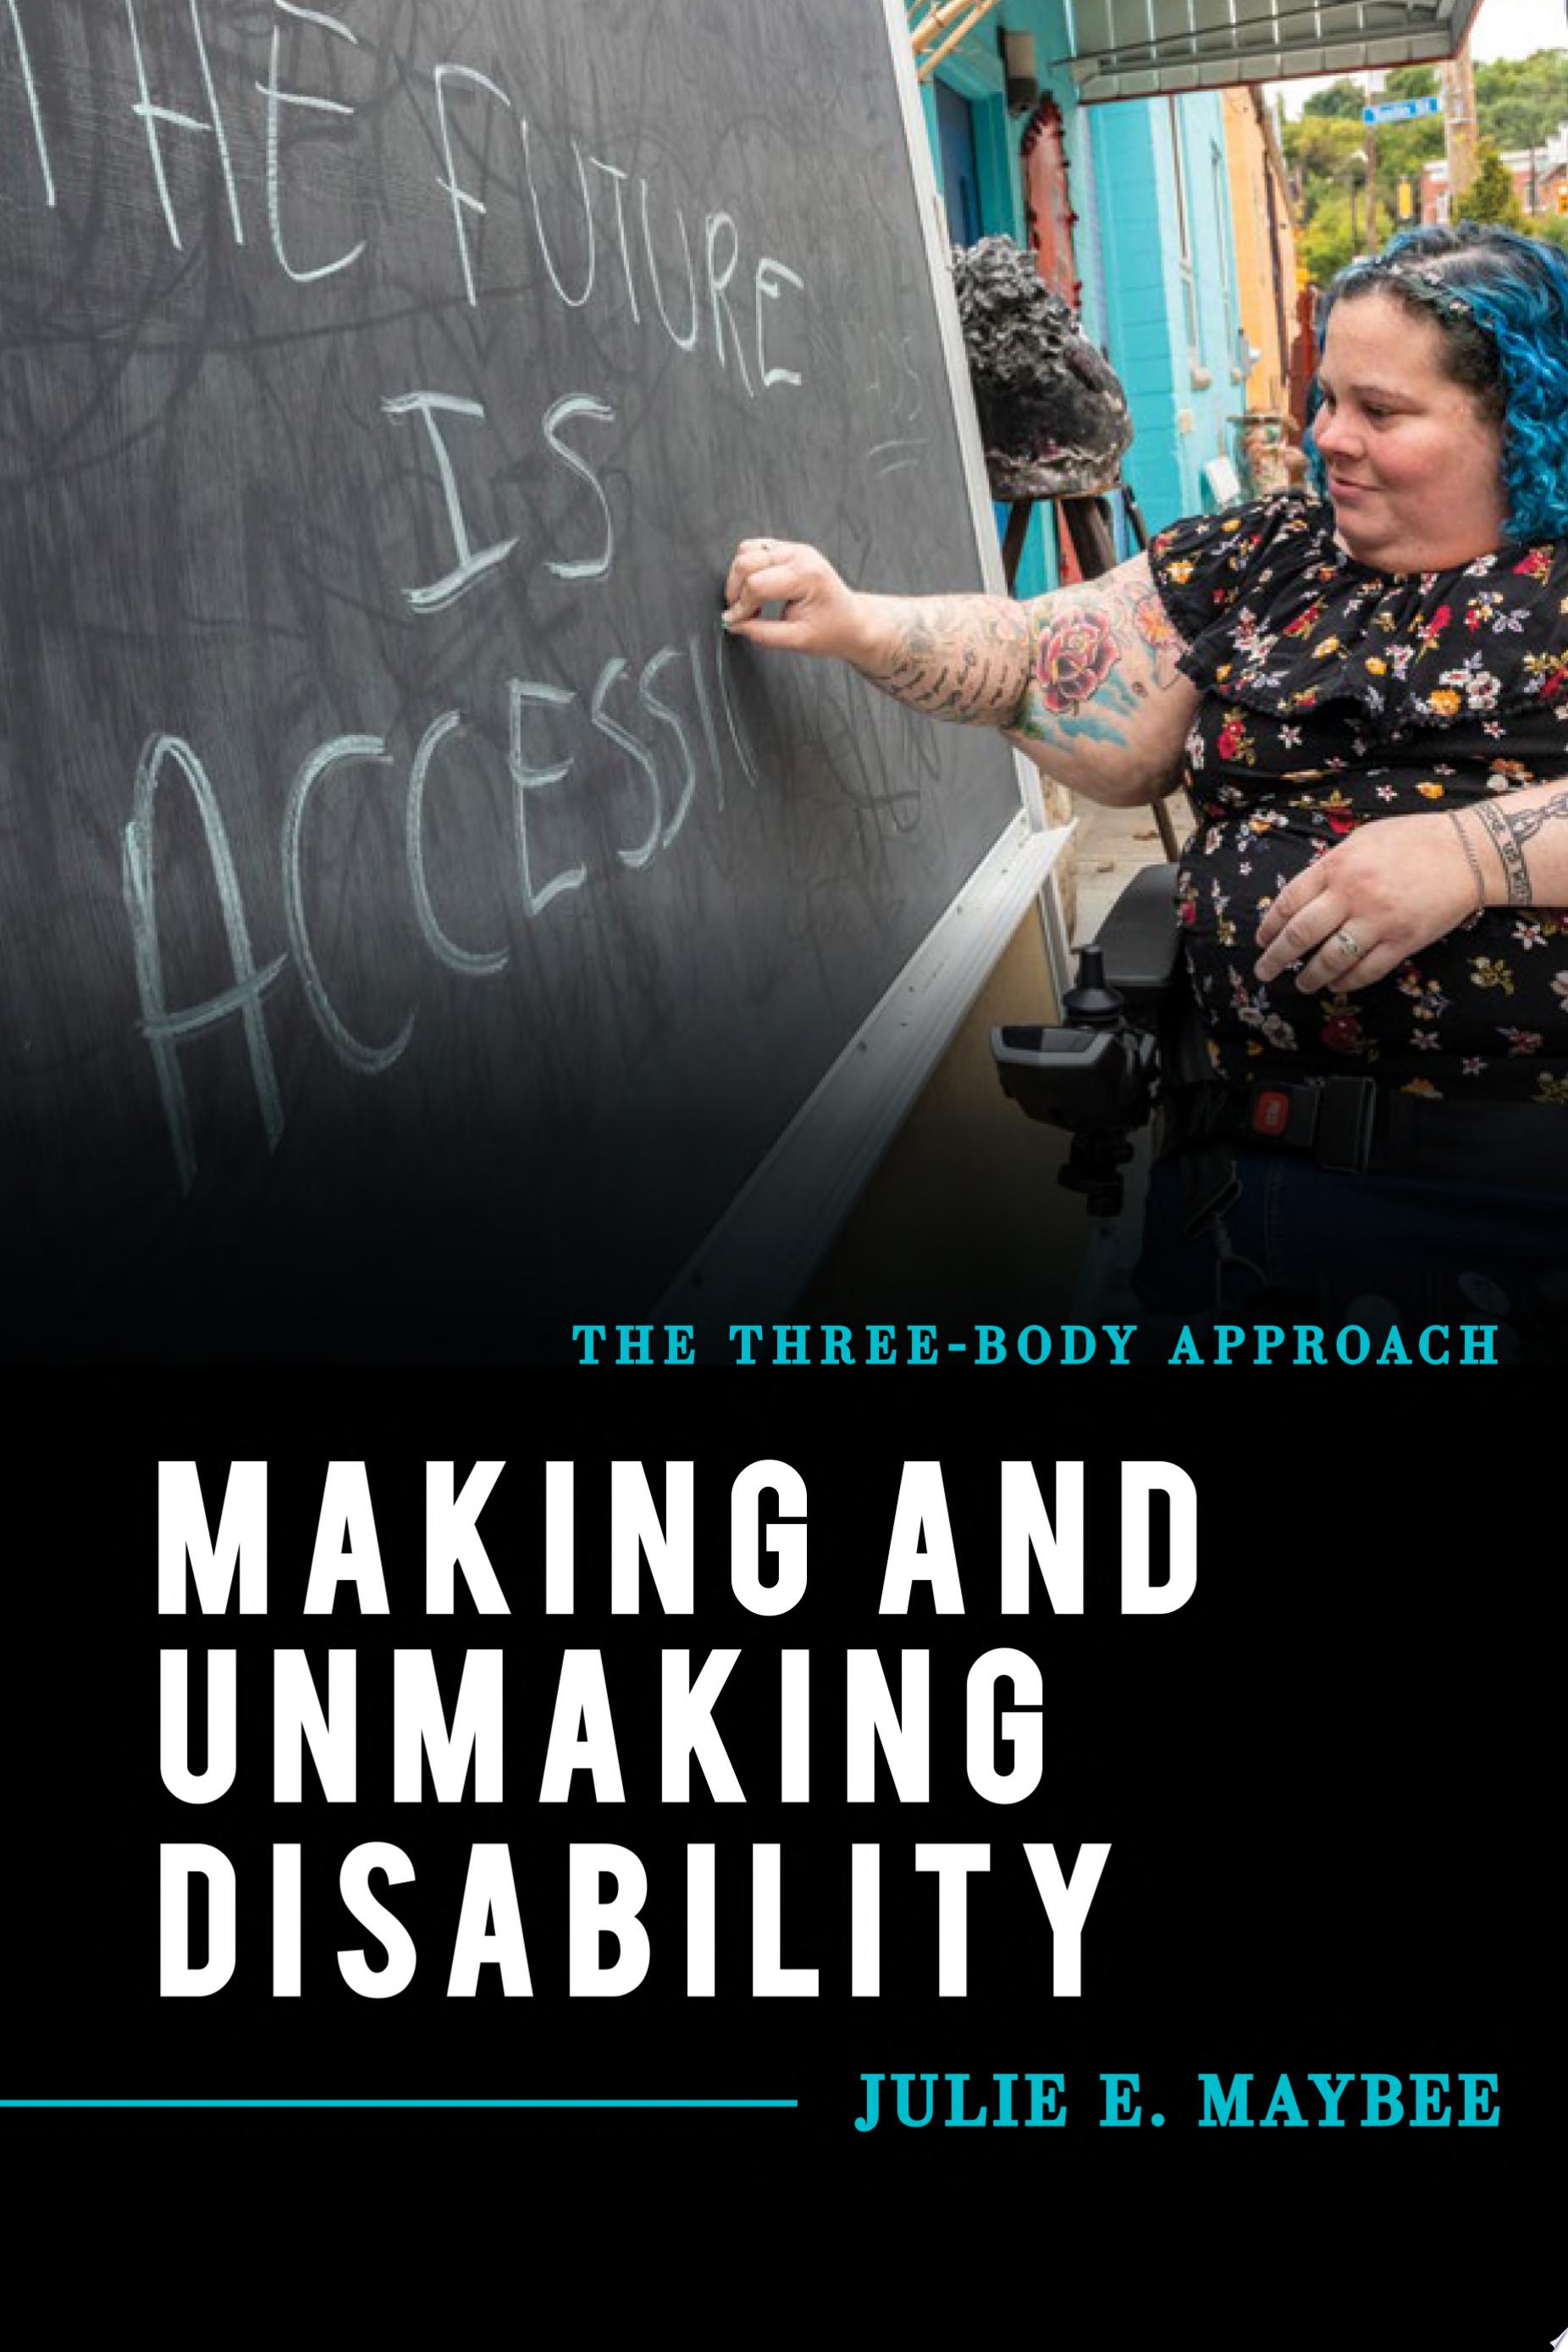 Image for "Making and Unmaking Disability"